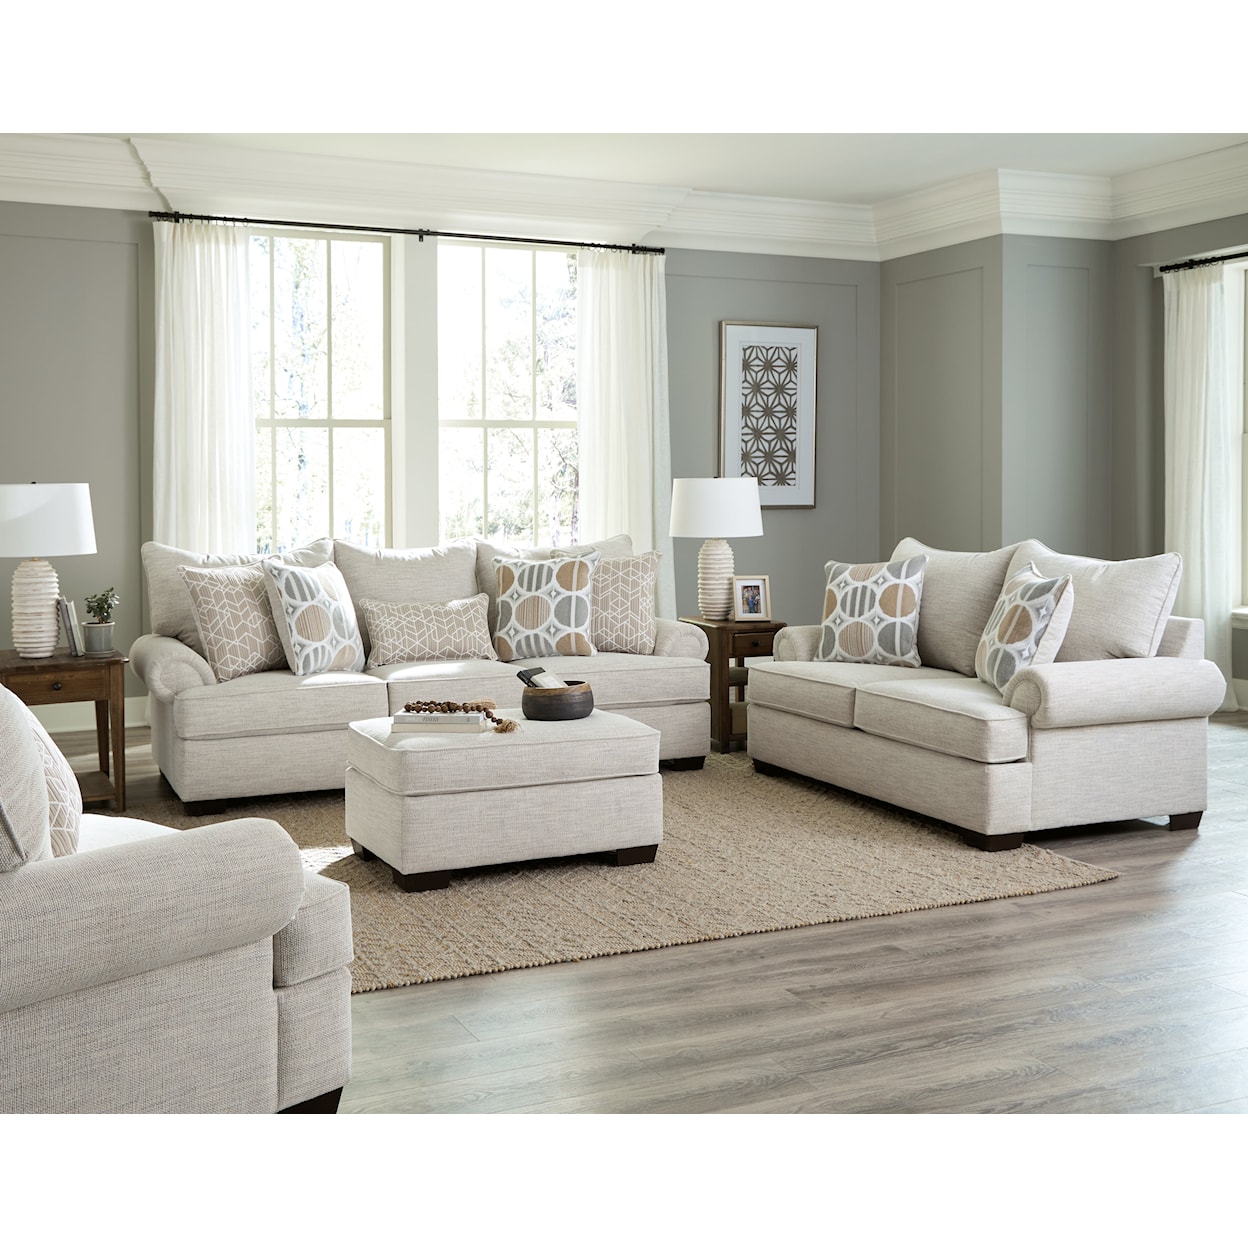 Behold Home 1082 Kirsty Cotton 3-Piece Living Room Set